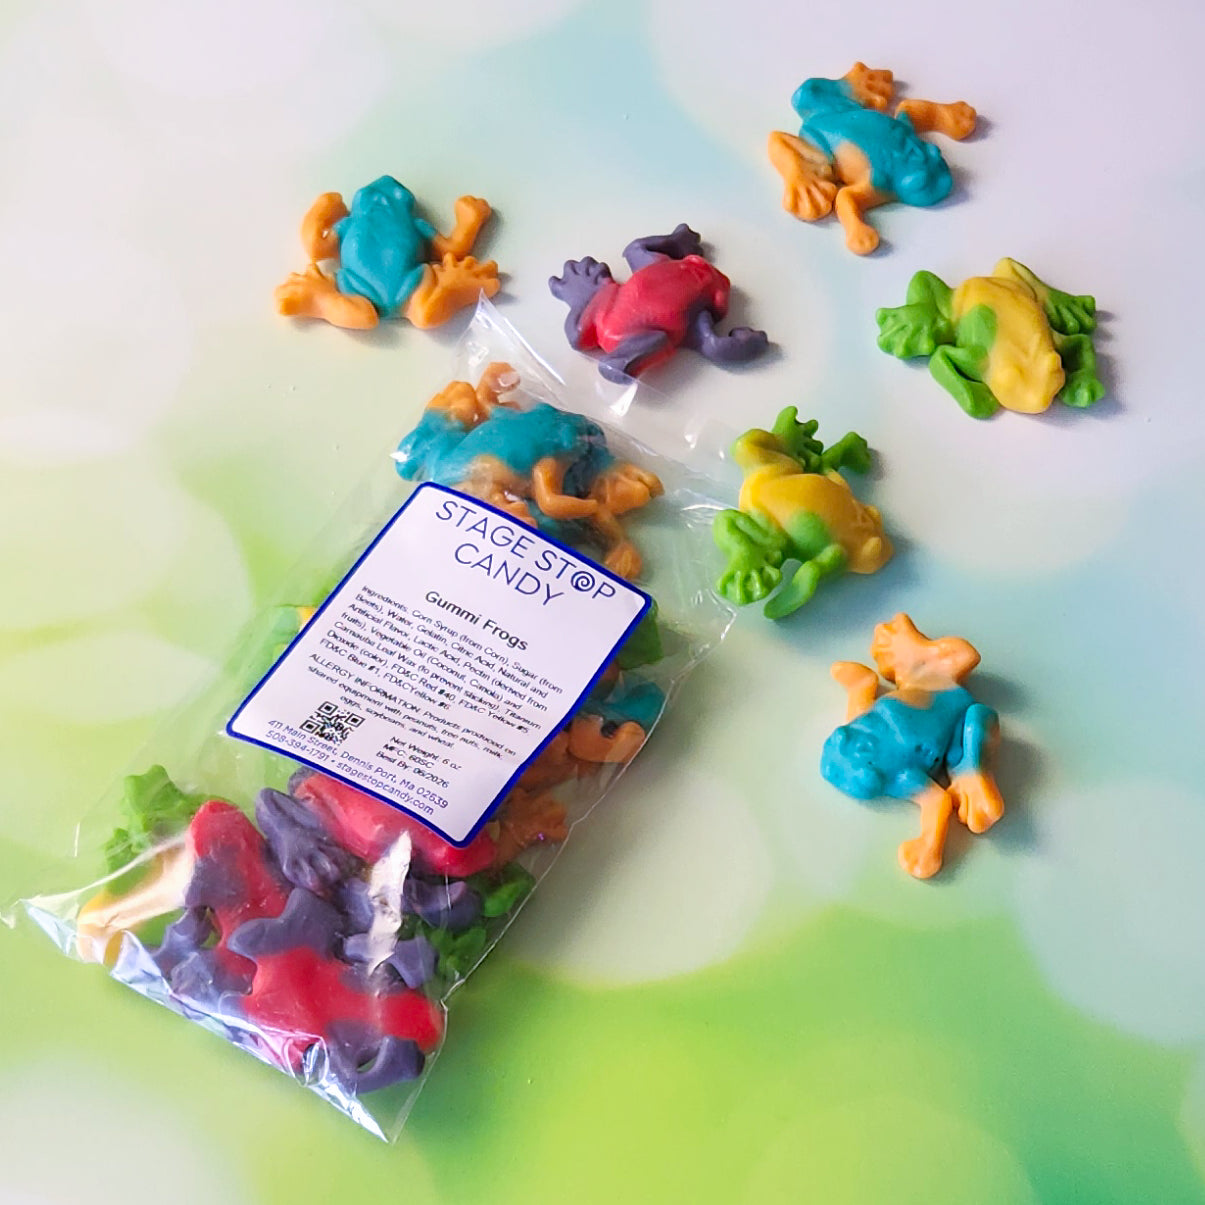 Enjoy our fresh, flavorful Gummi Frogs in a fun, frog-shaped treat! This 6-ounce bag is ideal for snacking and provides a delicious, fruity experience for all ages.